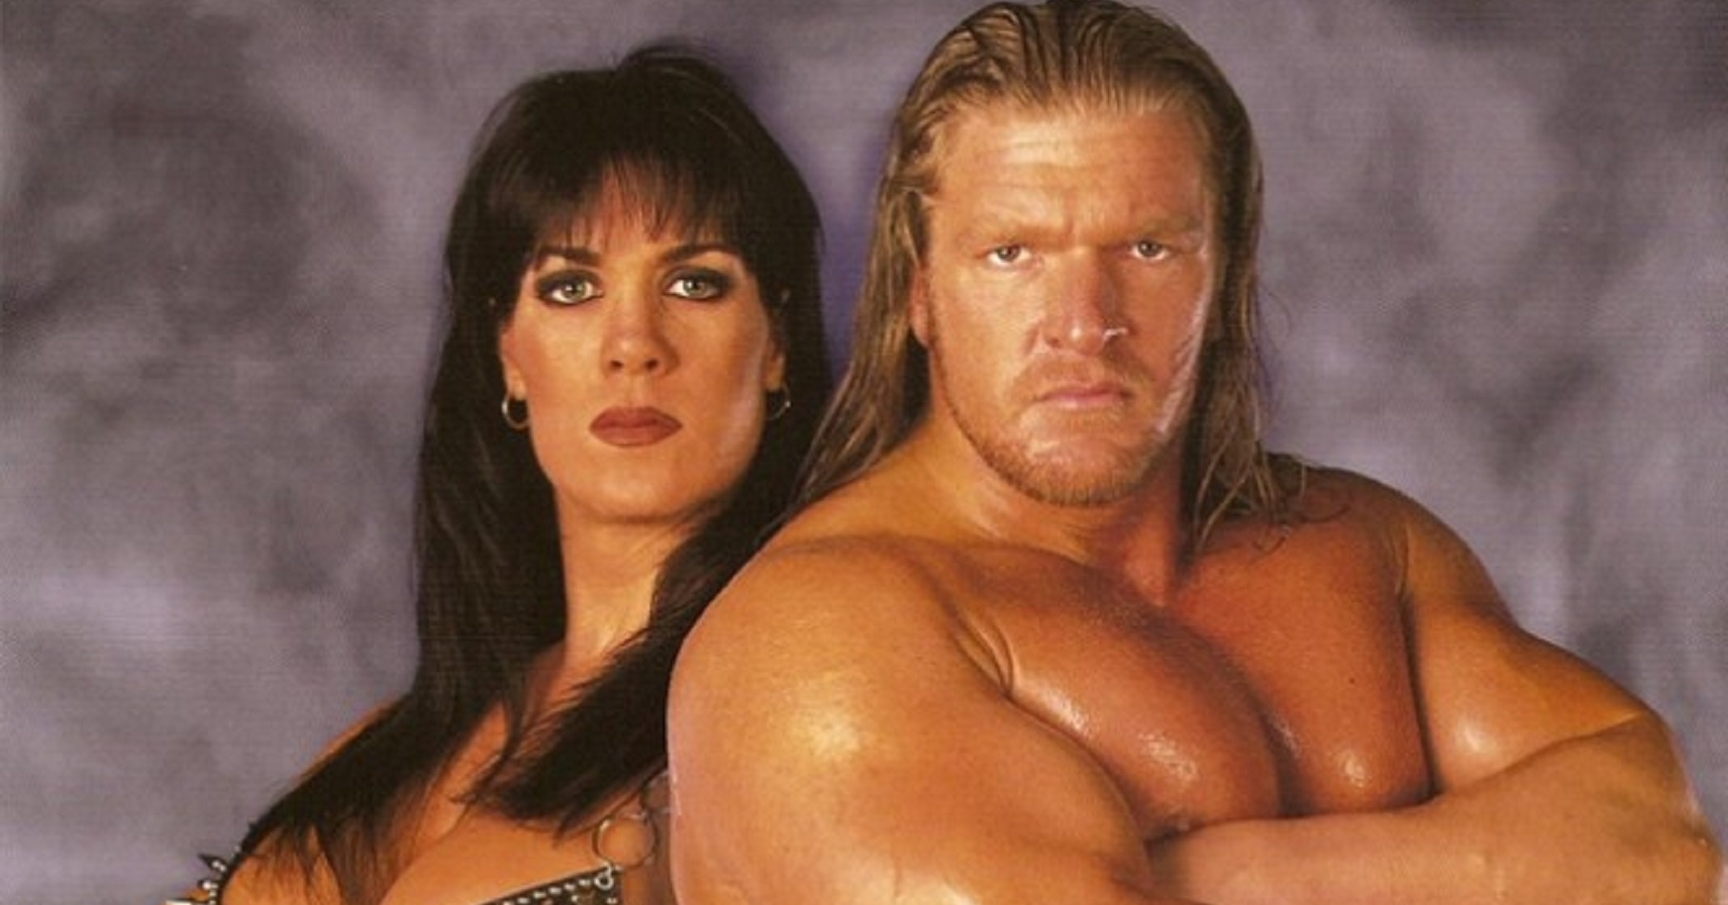 Triple H And Chyna Porn - Triple H And Others Comment On Chyna's Death